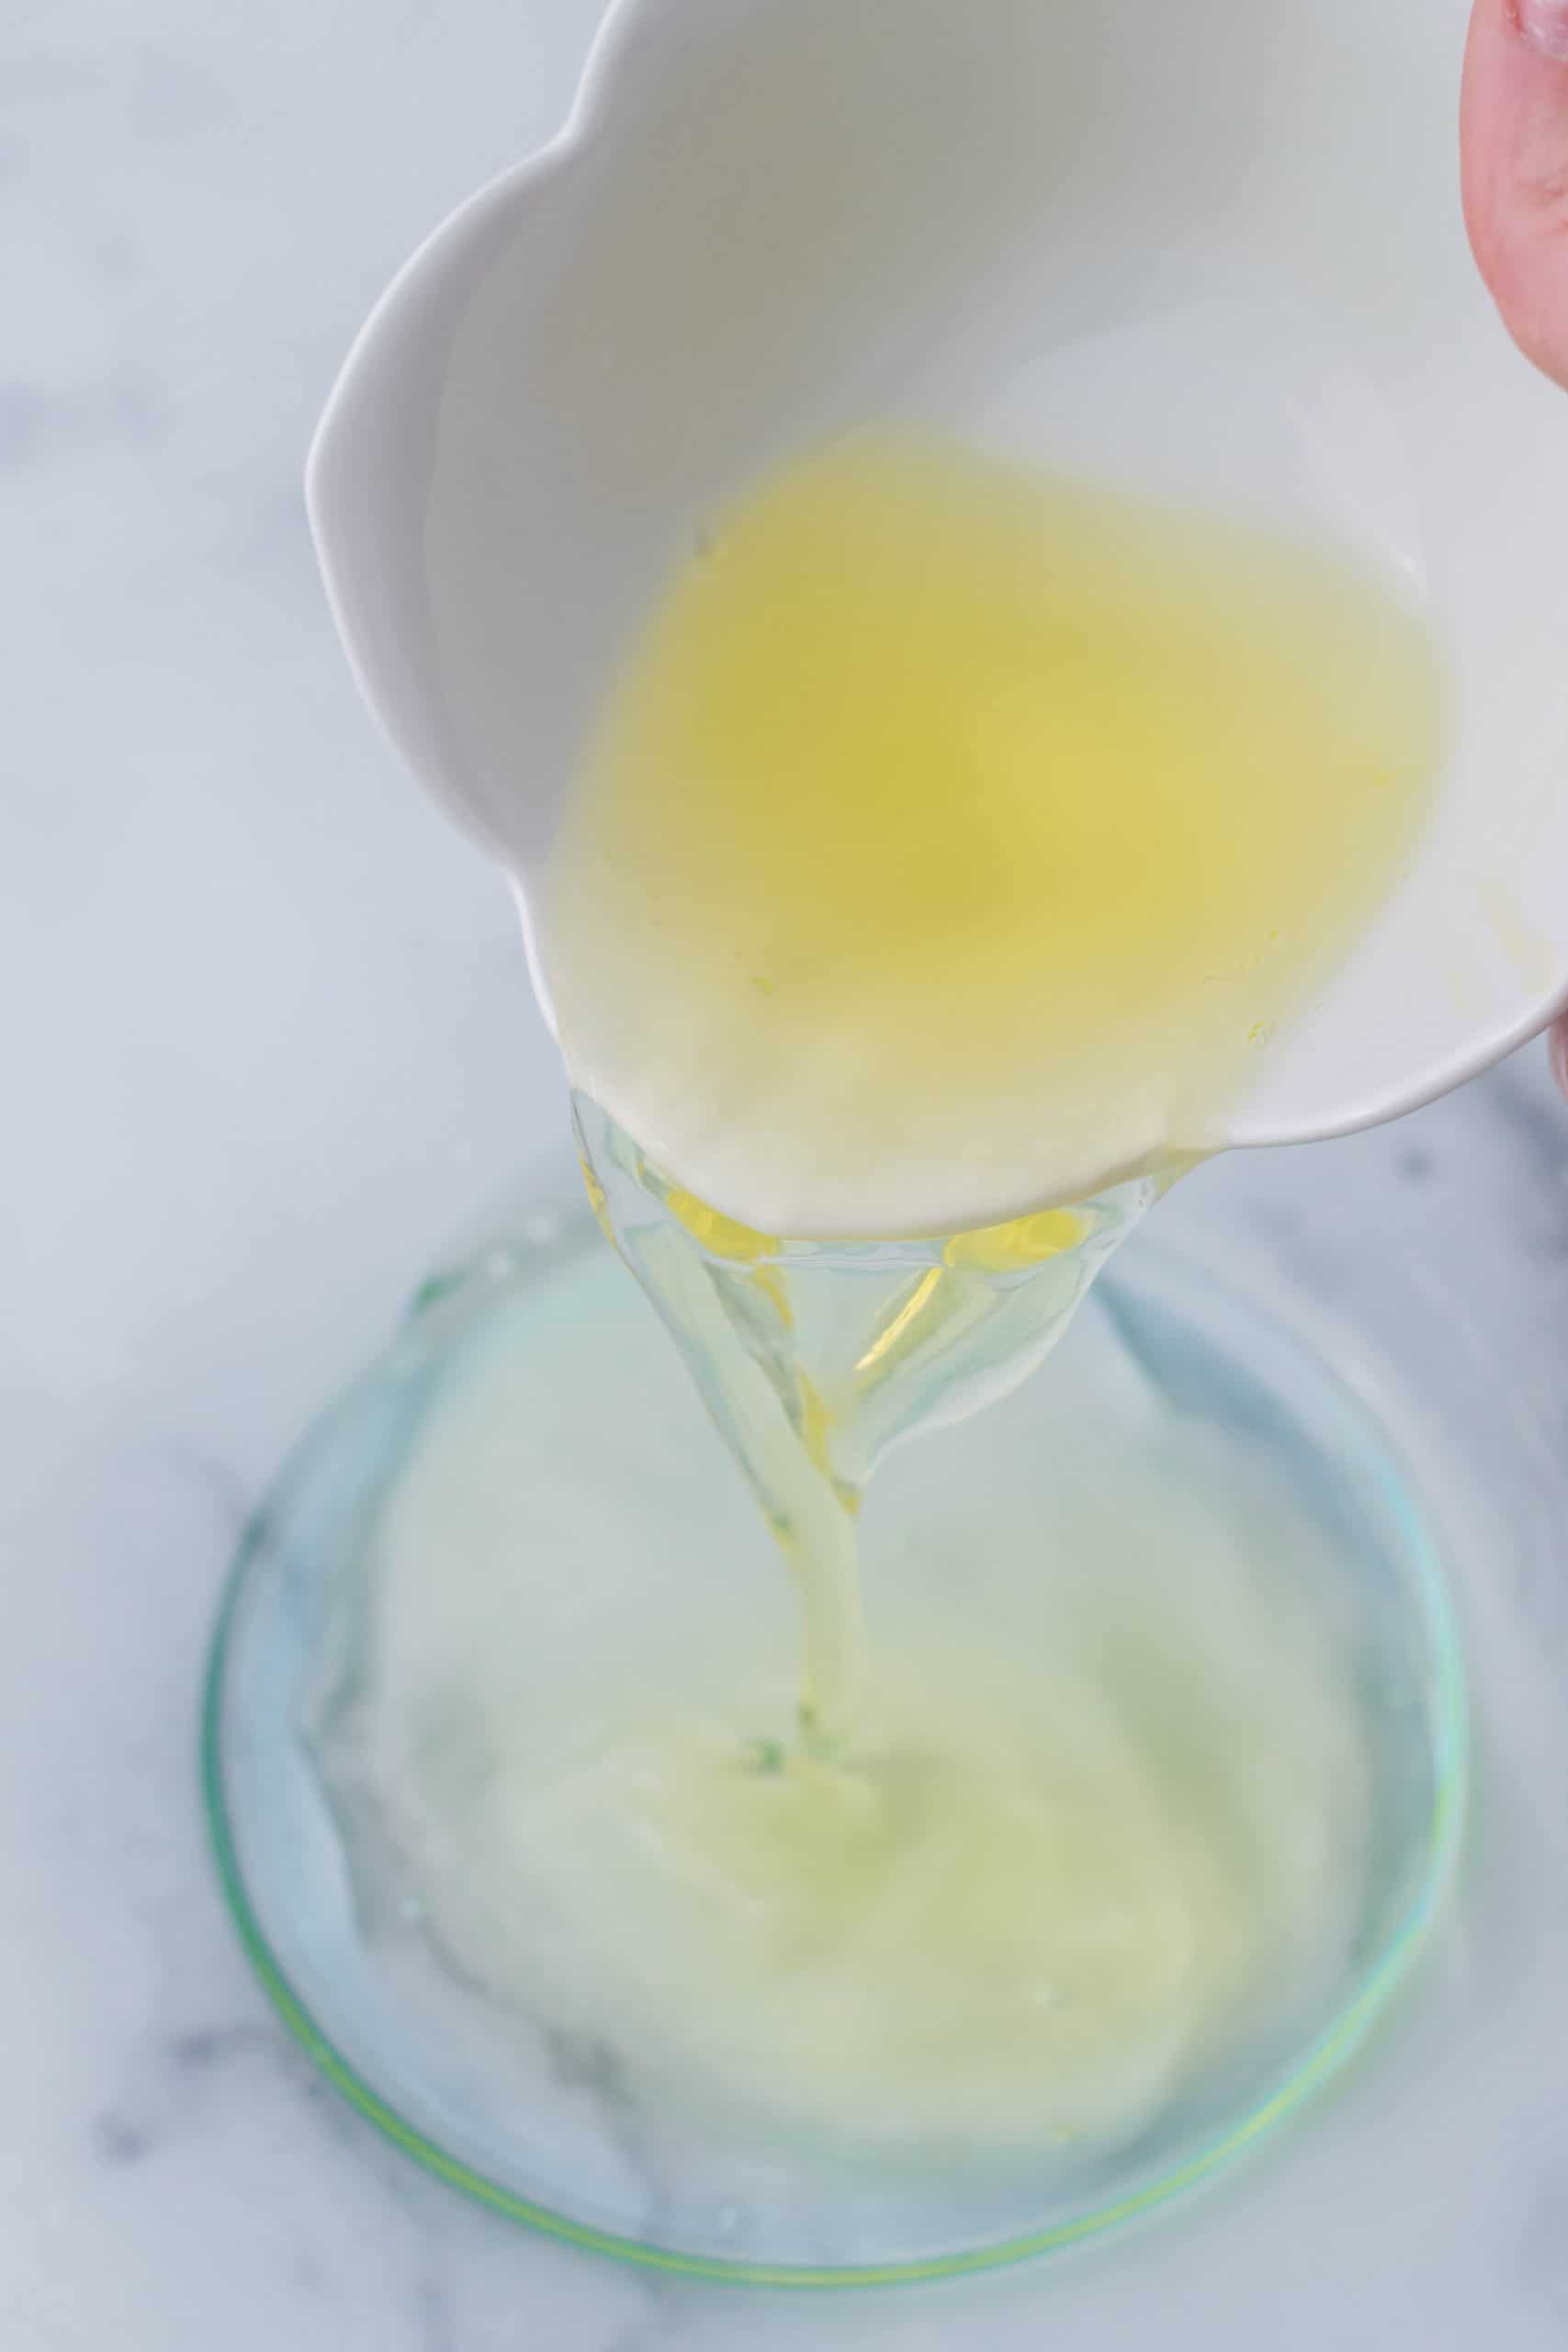 egg yolks being poured from a small white bowl in a larger clear bowl.